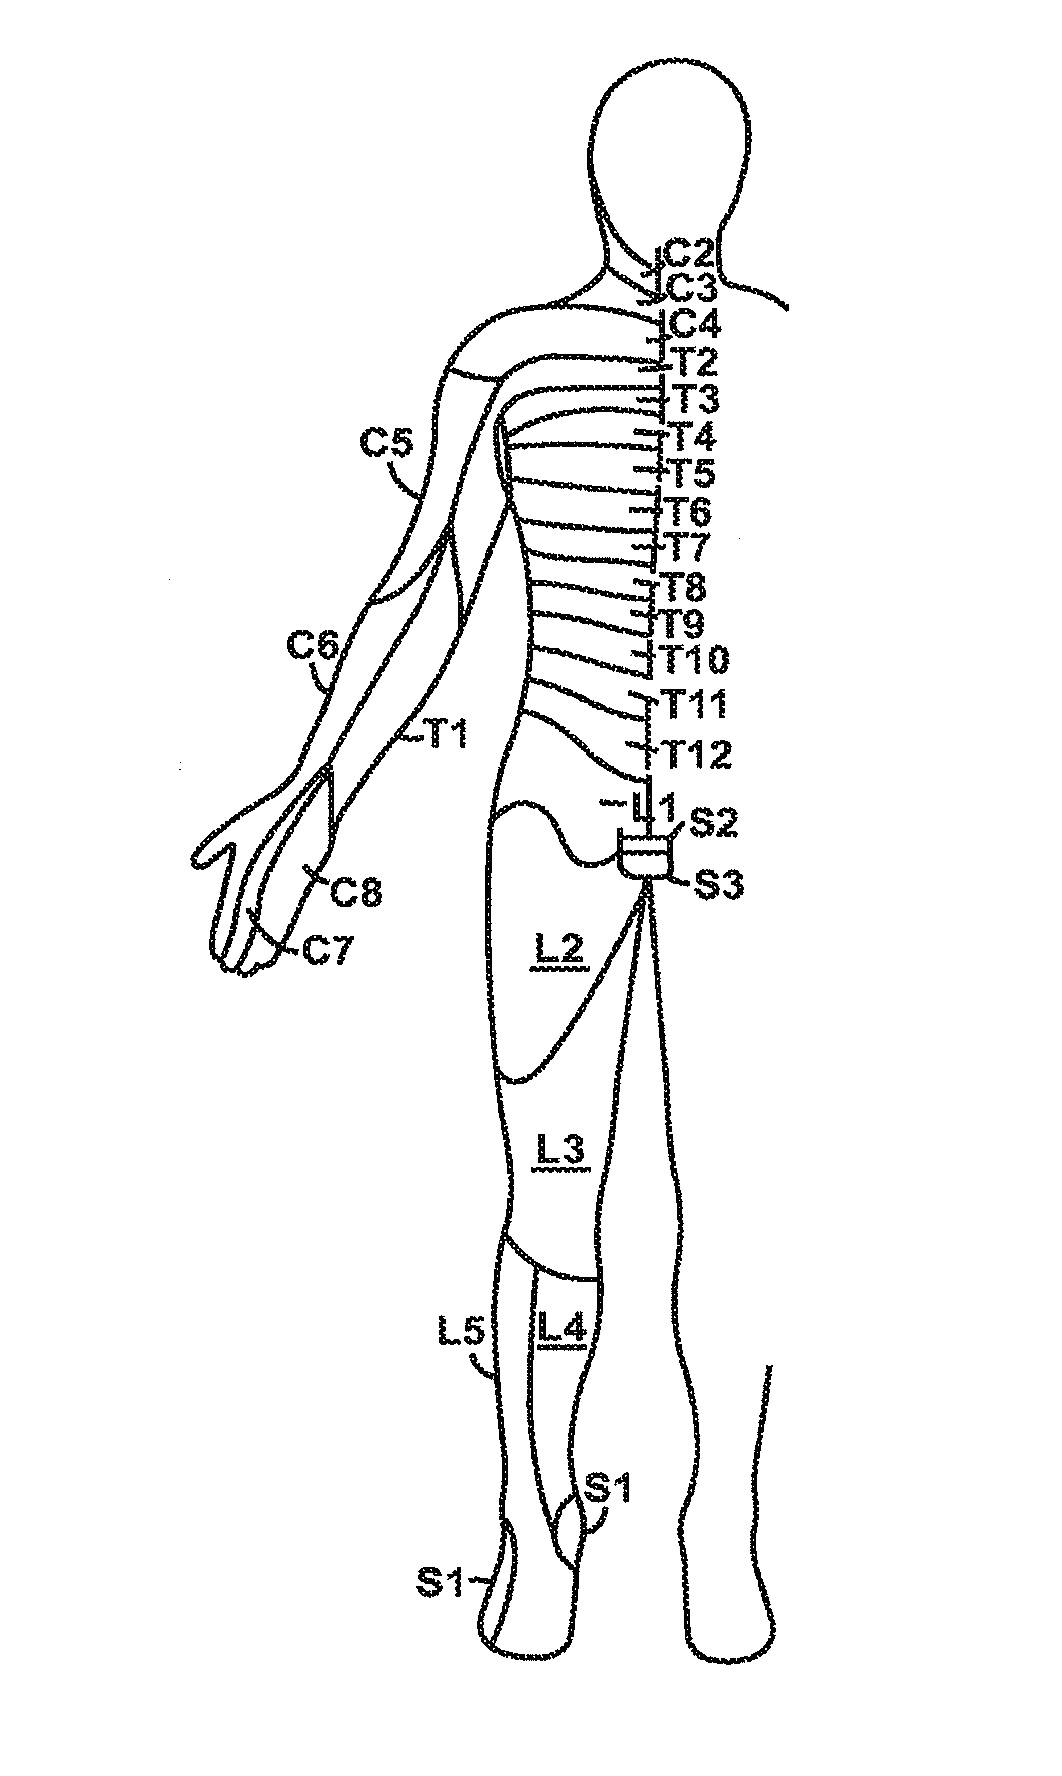 Systems and methods for neuromodulation for treatment of pain and other disorders associated with nerve conduction